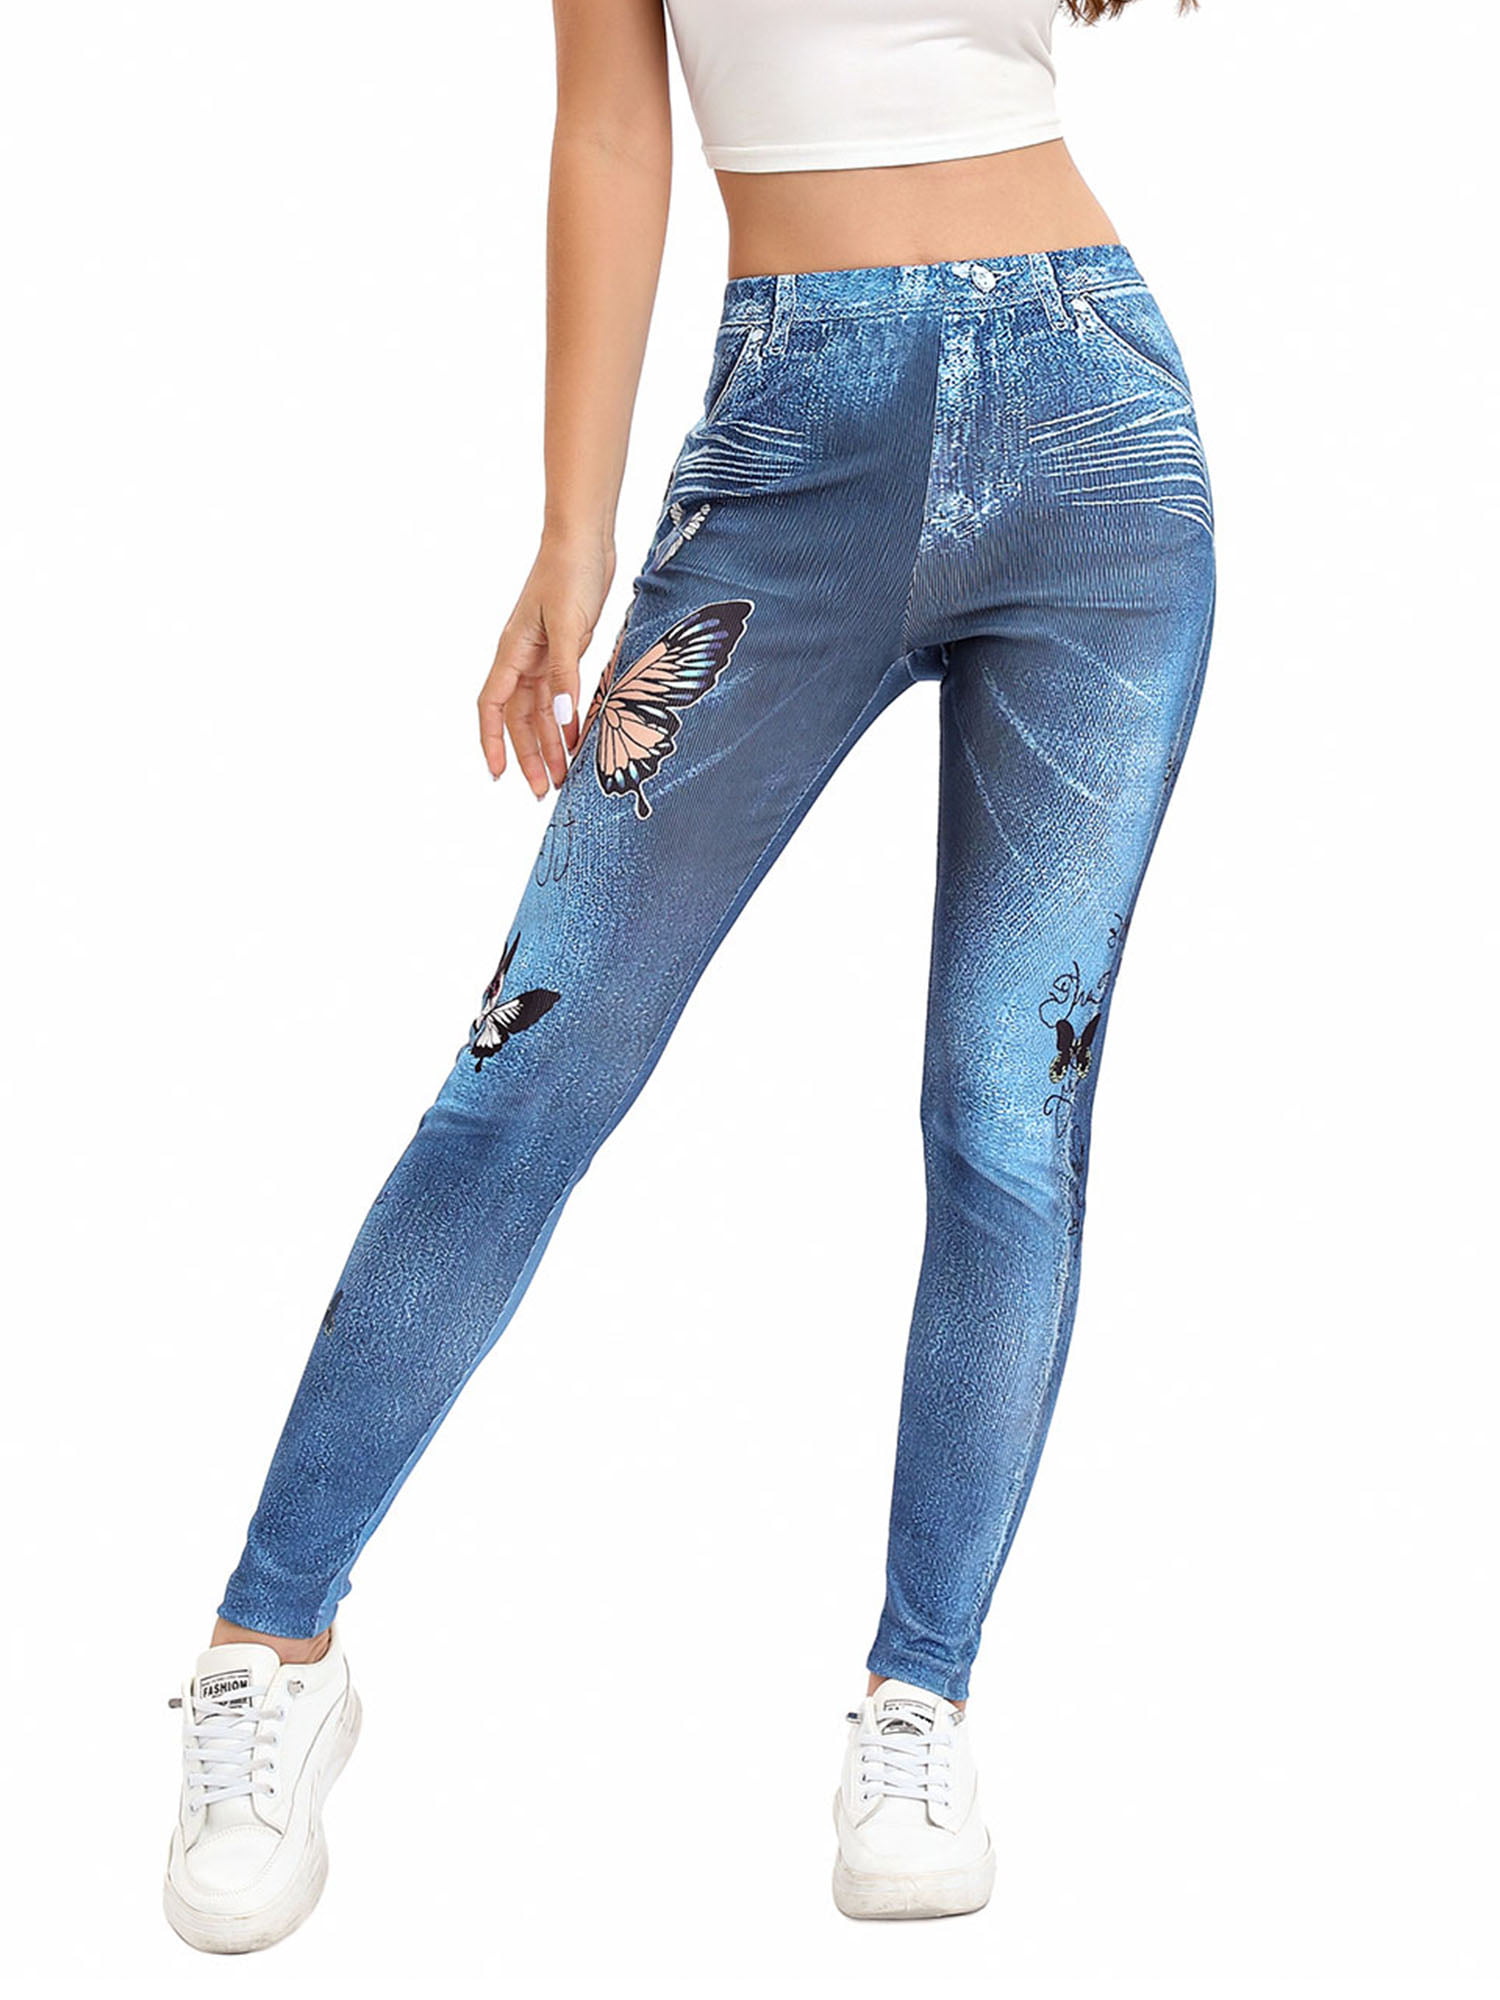 Frontwalk Jean Leggings for Women Printed Denim High Waisted Yoga Pants  Stretch Jean Look Jeggings Tights Blue-D S 